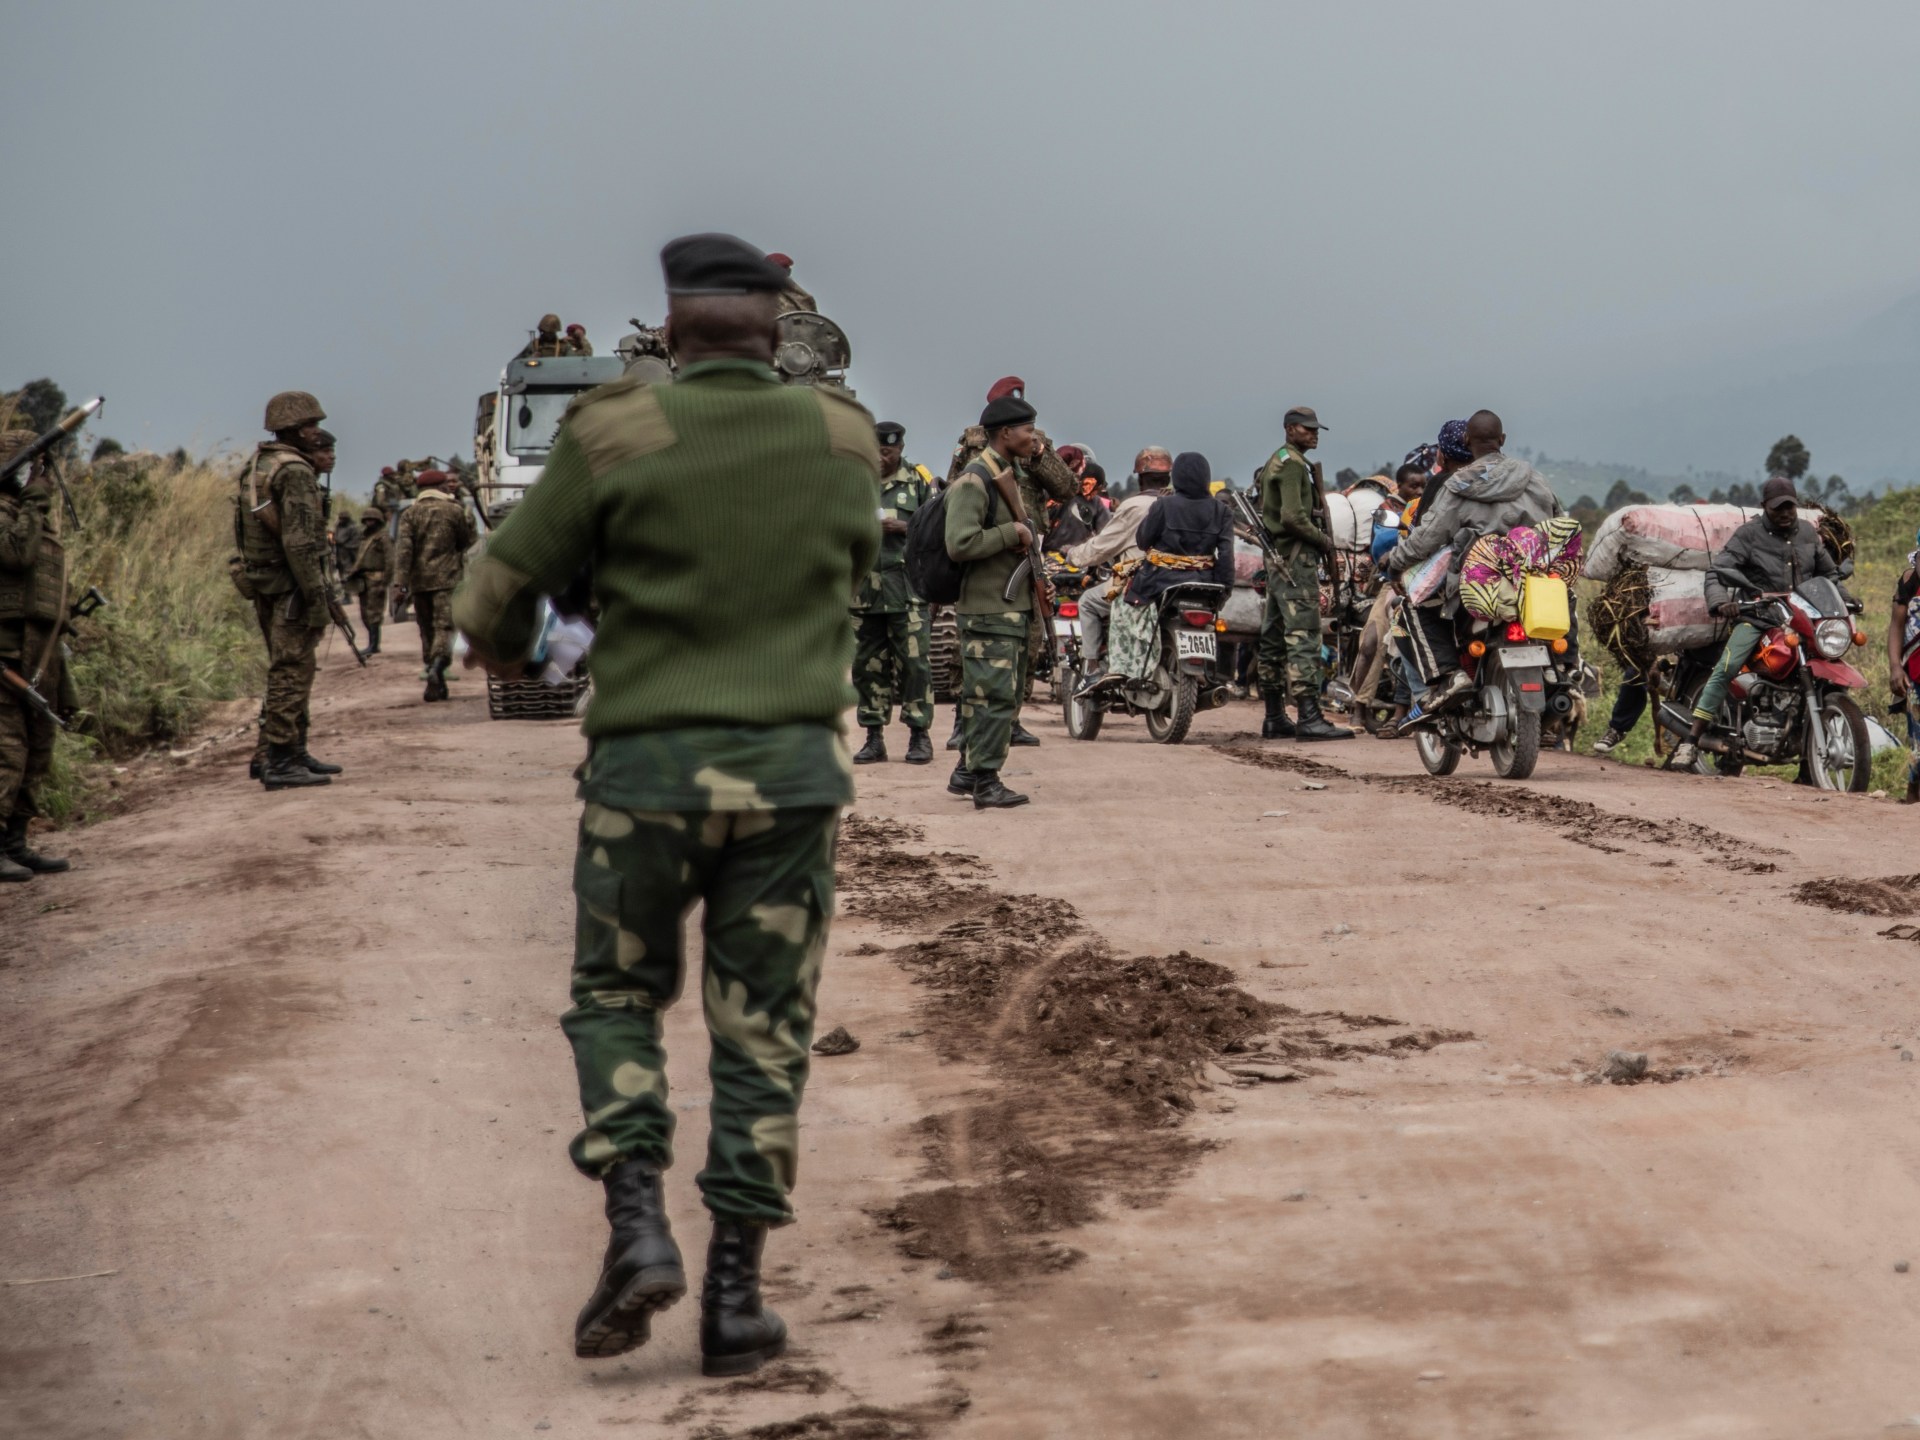 DRC fighting resumes, M23 say ceasefire deal doesn’t affect them